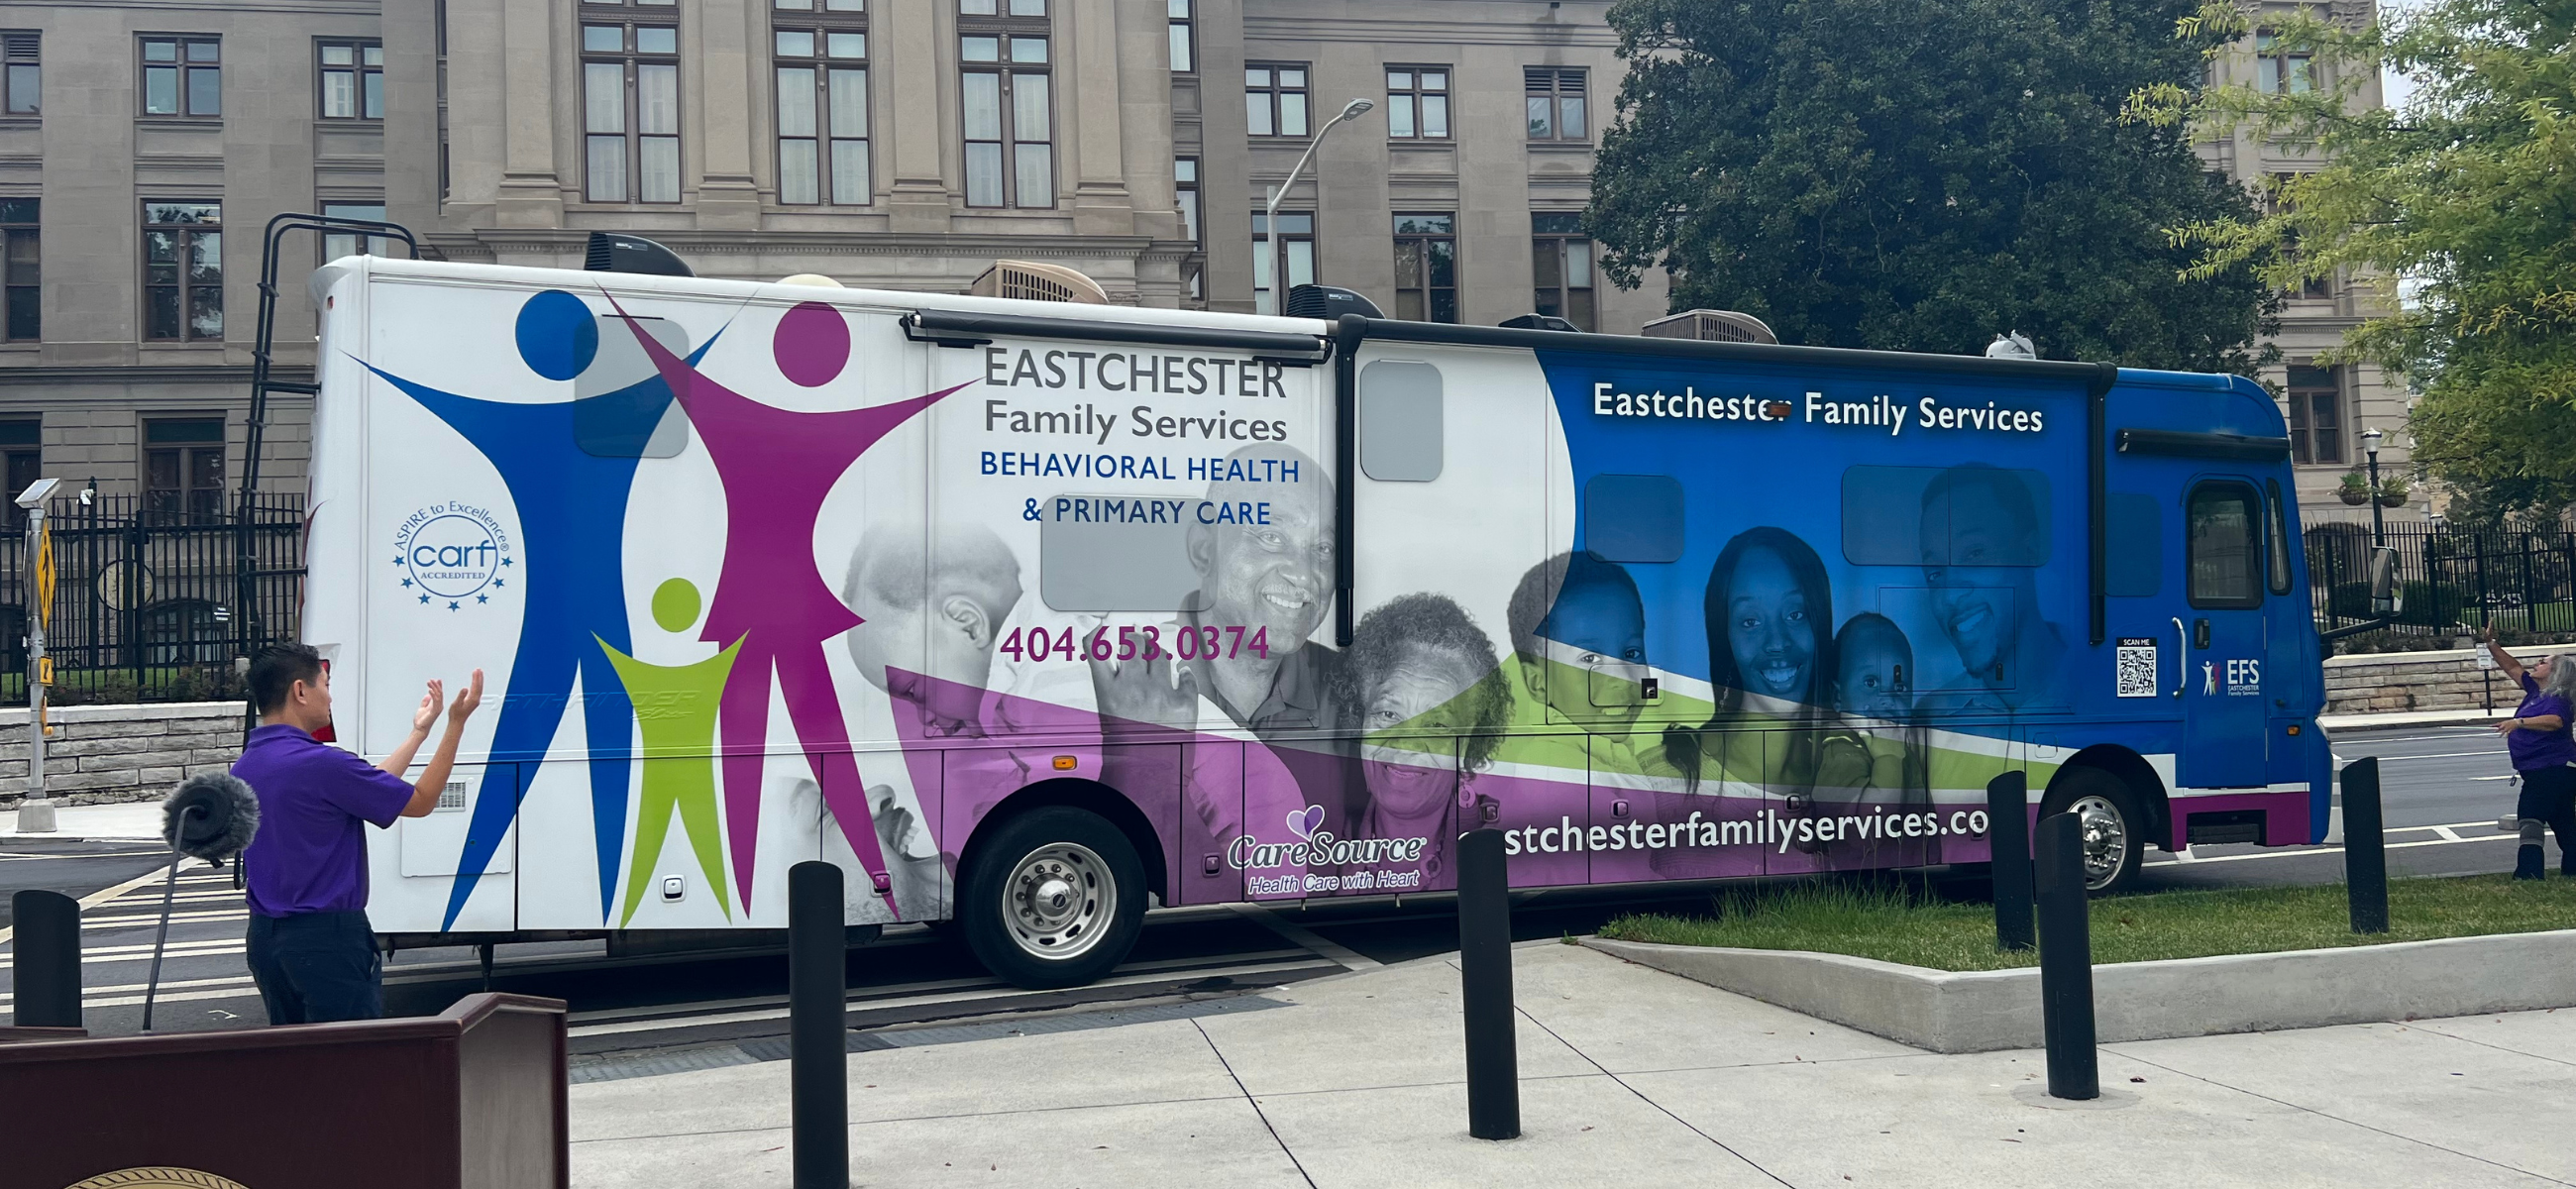 A mobile unit operated by Eastchester Family services. It a retrofitted RV.